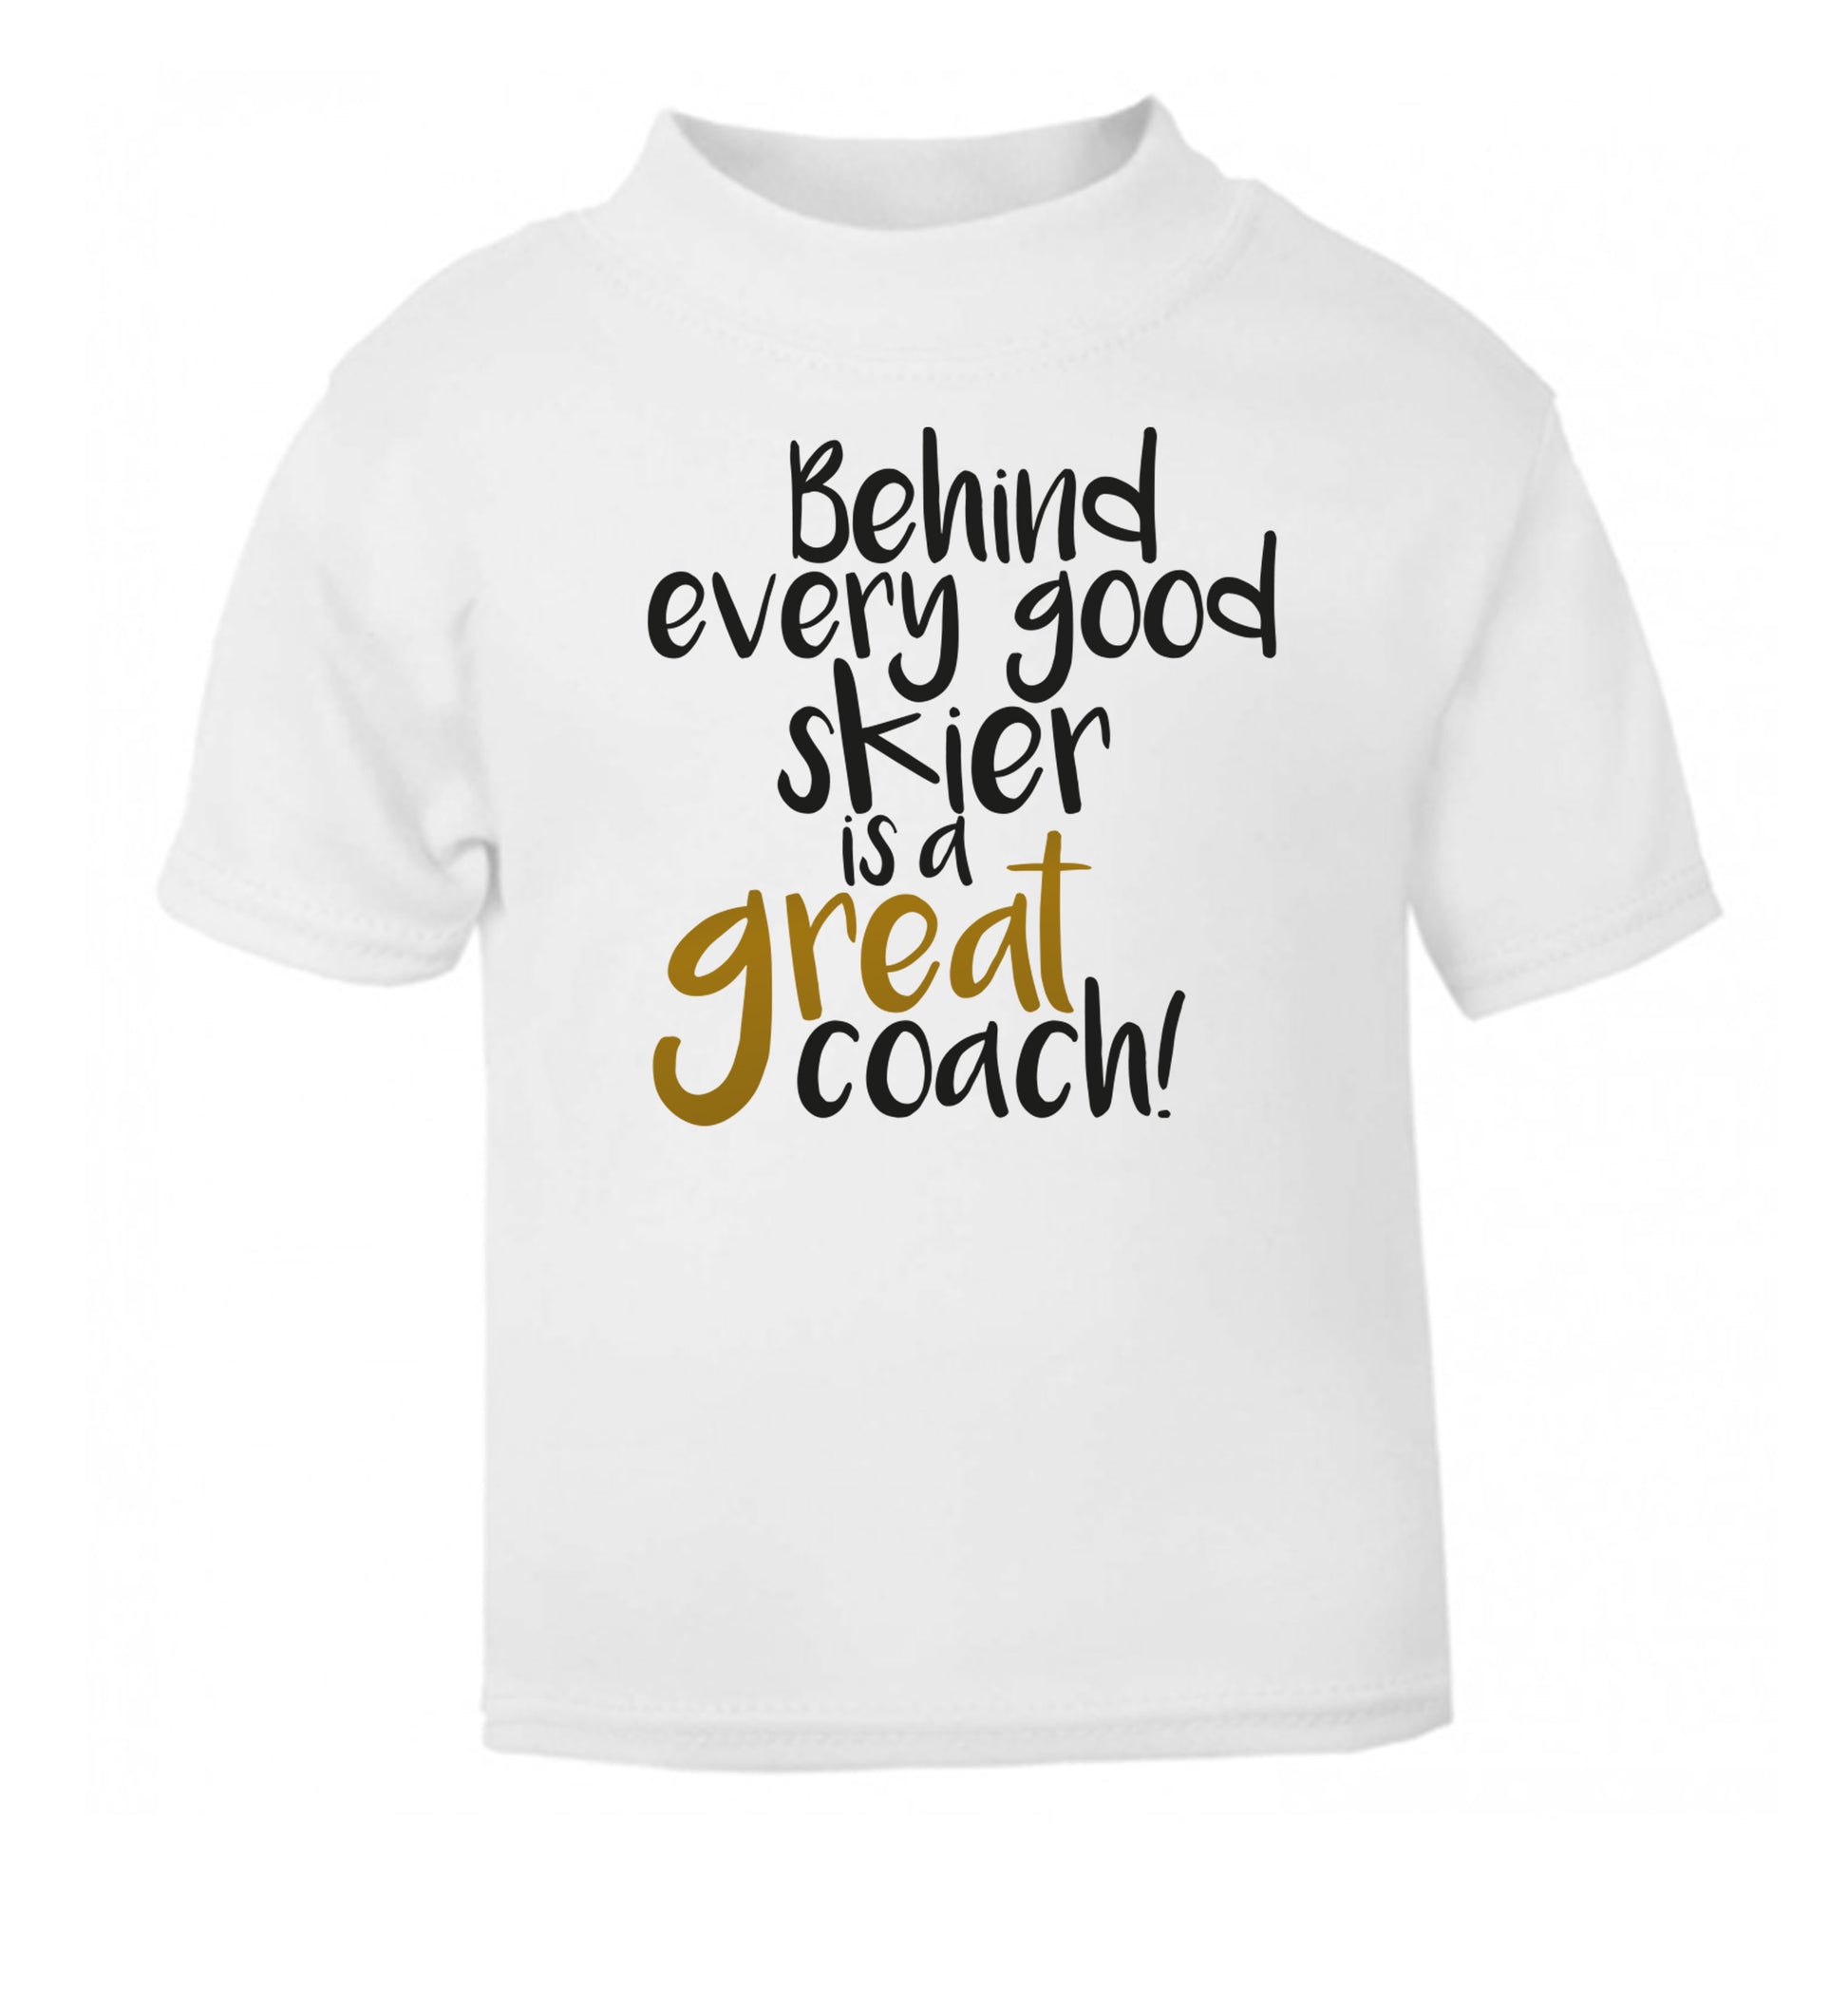 Behind every good skier is a great coach! white Baby Toddler Tshirt 2 Years